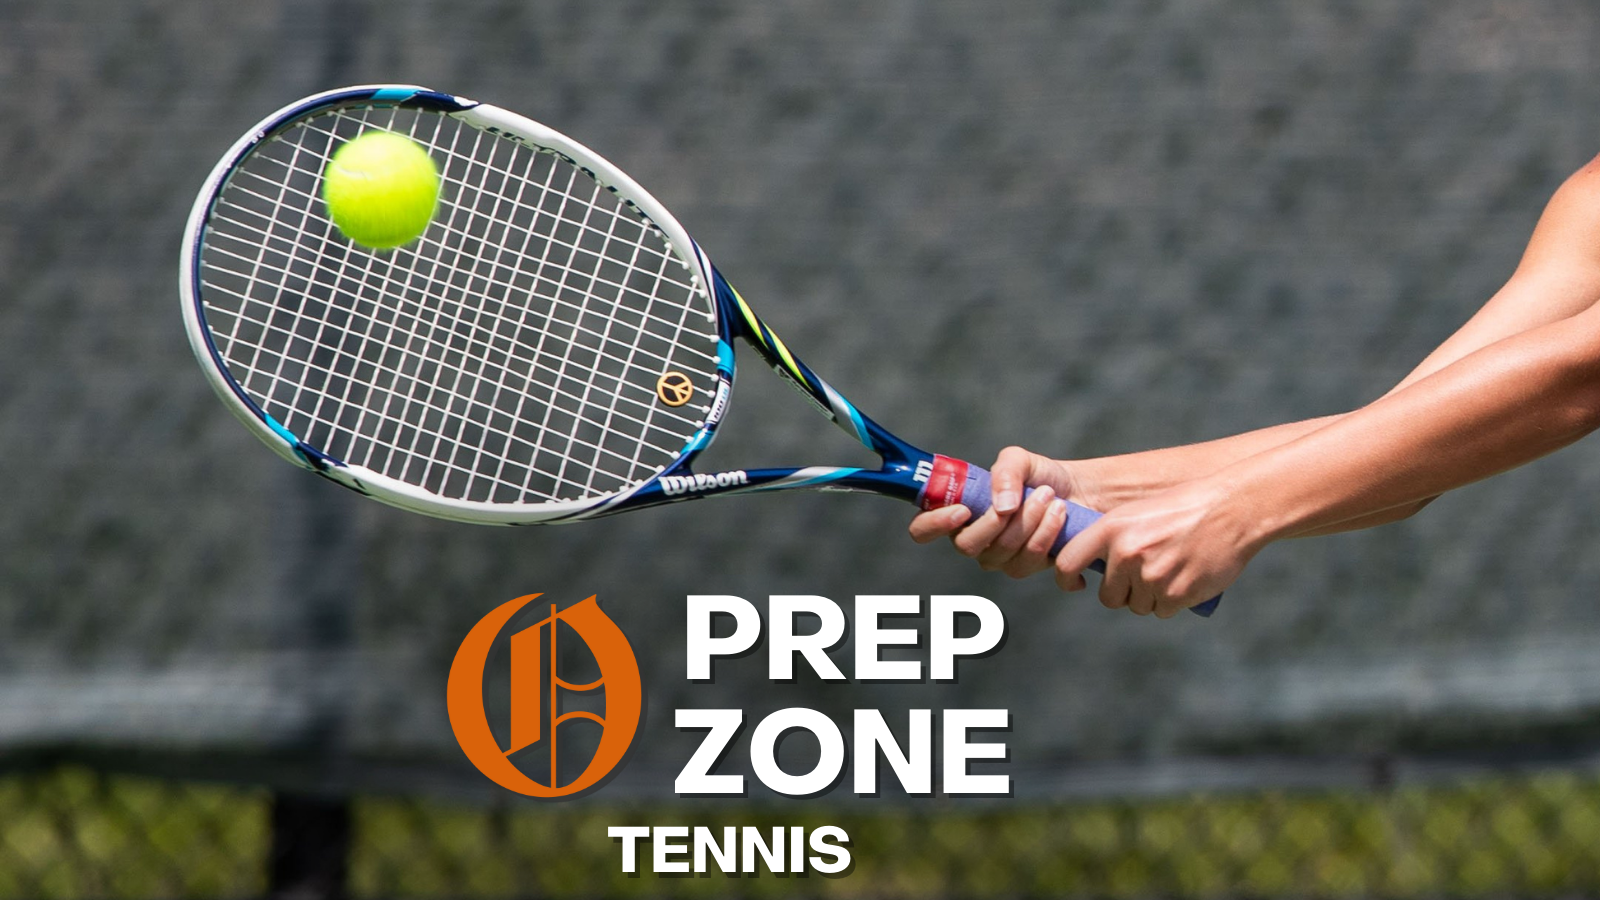 Nebraska High School Girls Tennis Season Preview: Top Players, Teams, and Expectations for State Title